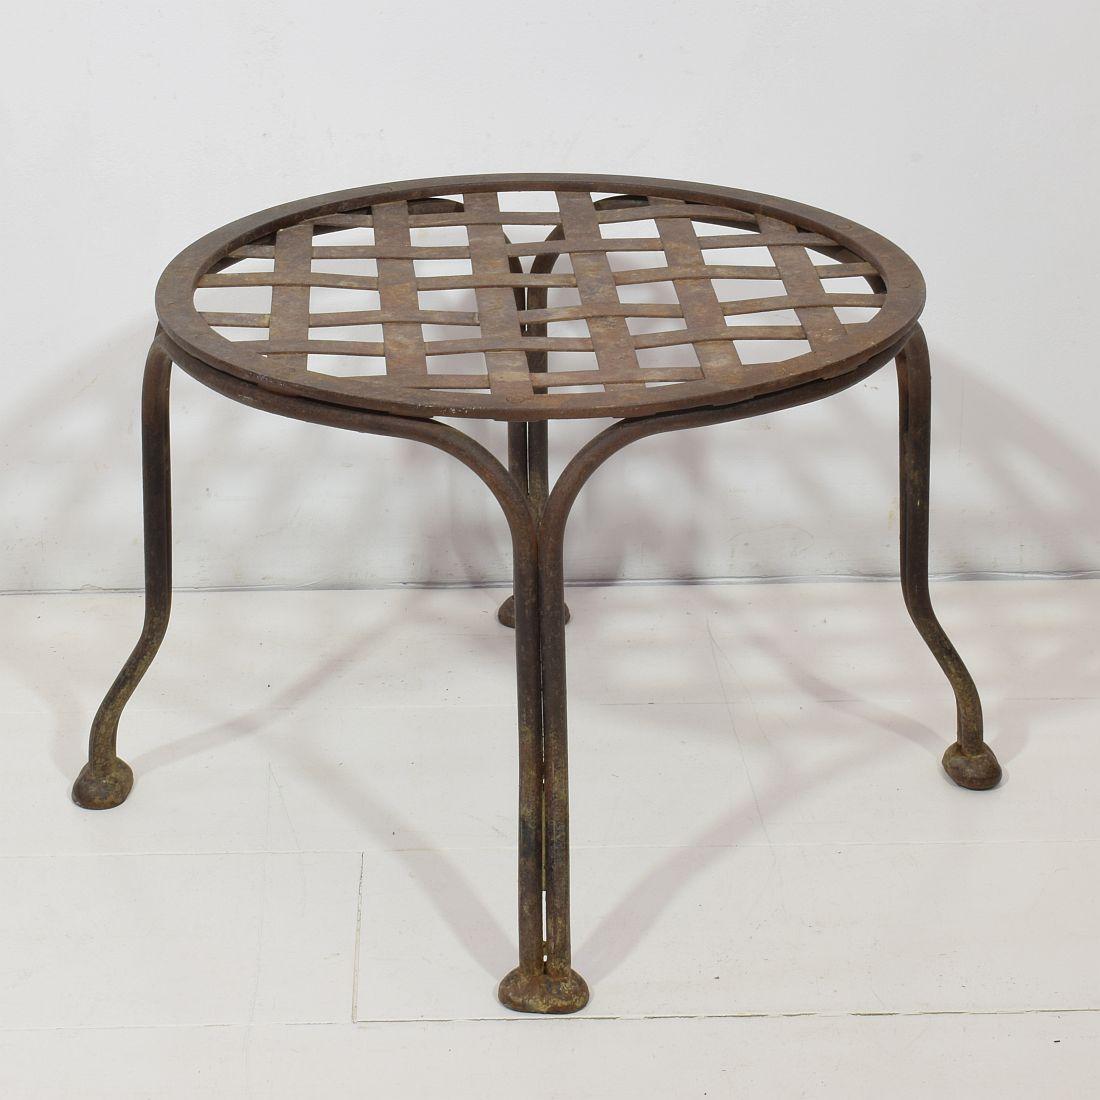 French Mid-20th Century Iron Stool or Tabouret In Good Condition For Sale In Buisson, FR